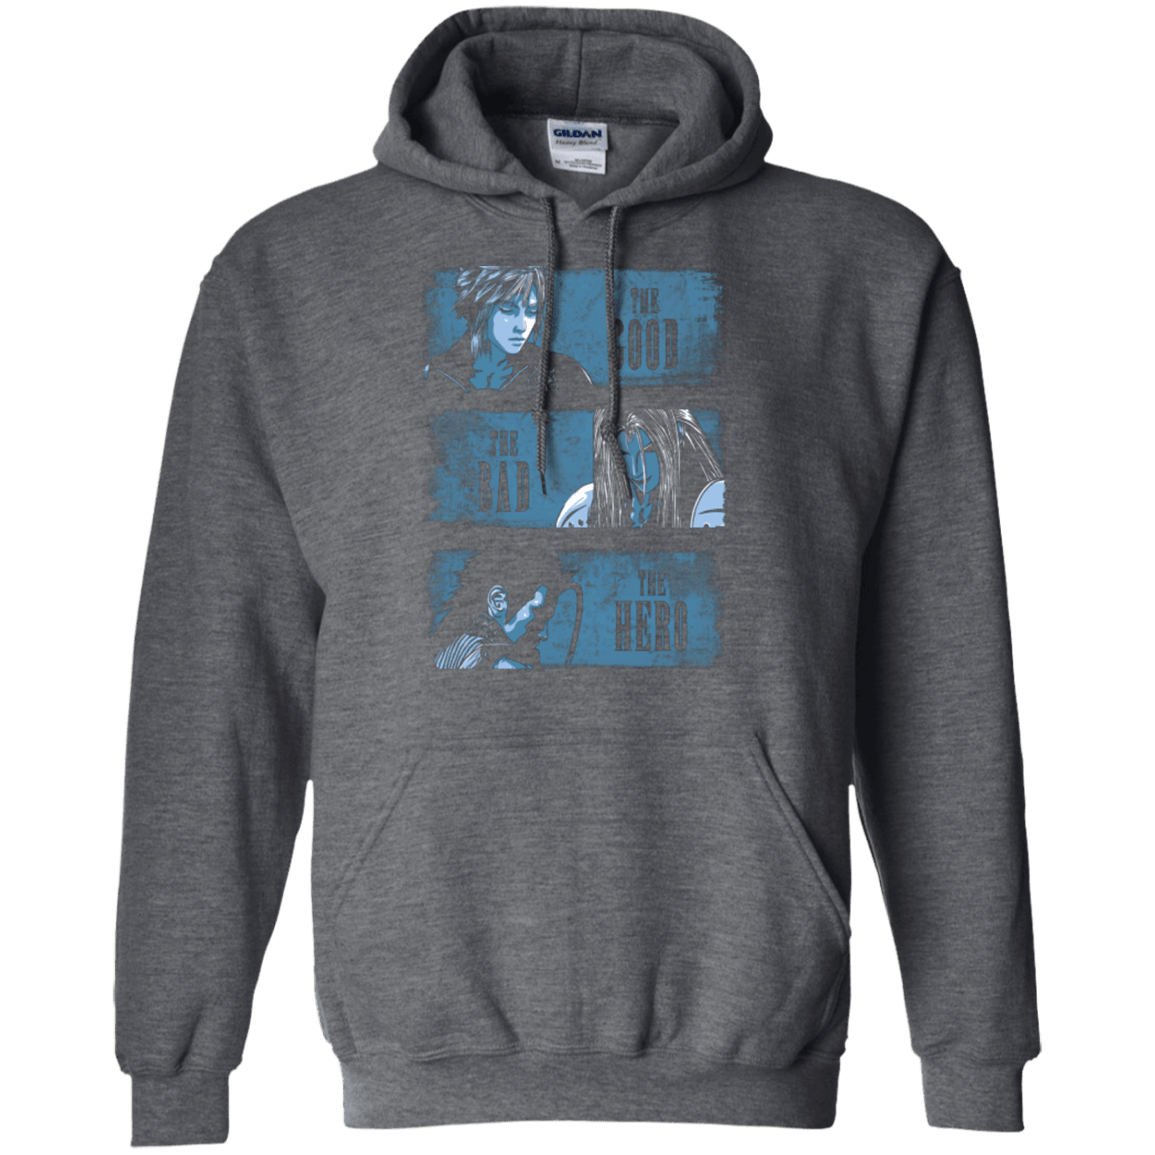 Sweatshirts Dark Heather / Small The Good the Bad and the Hero Pullover Hoodie